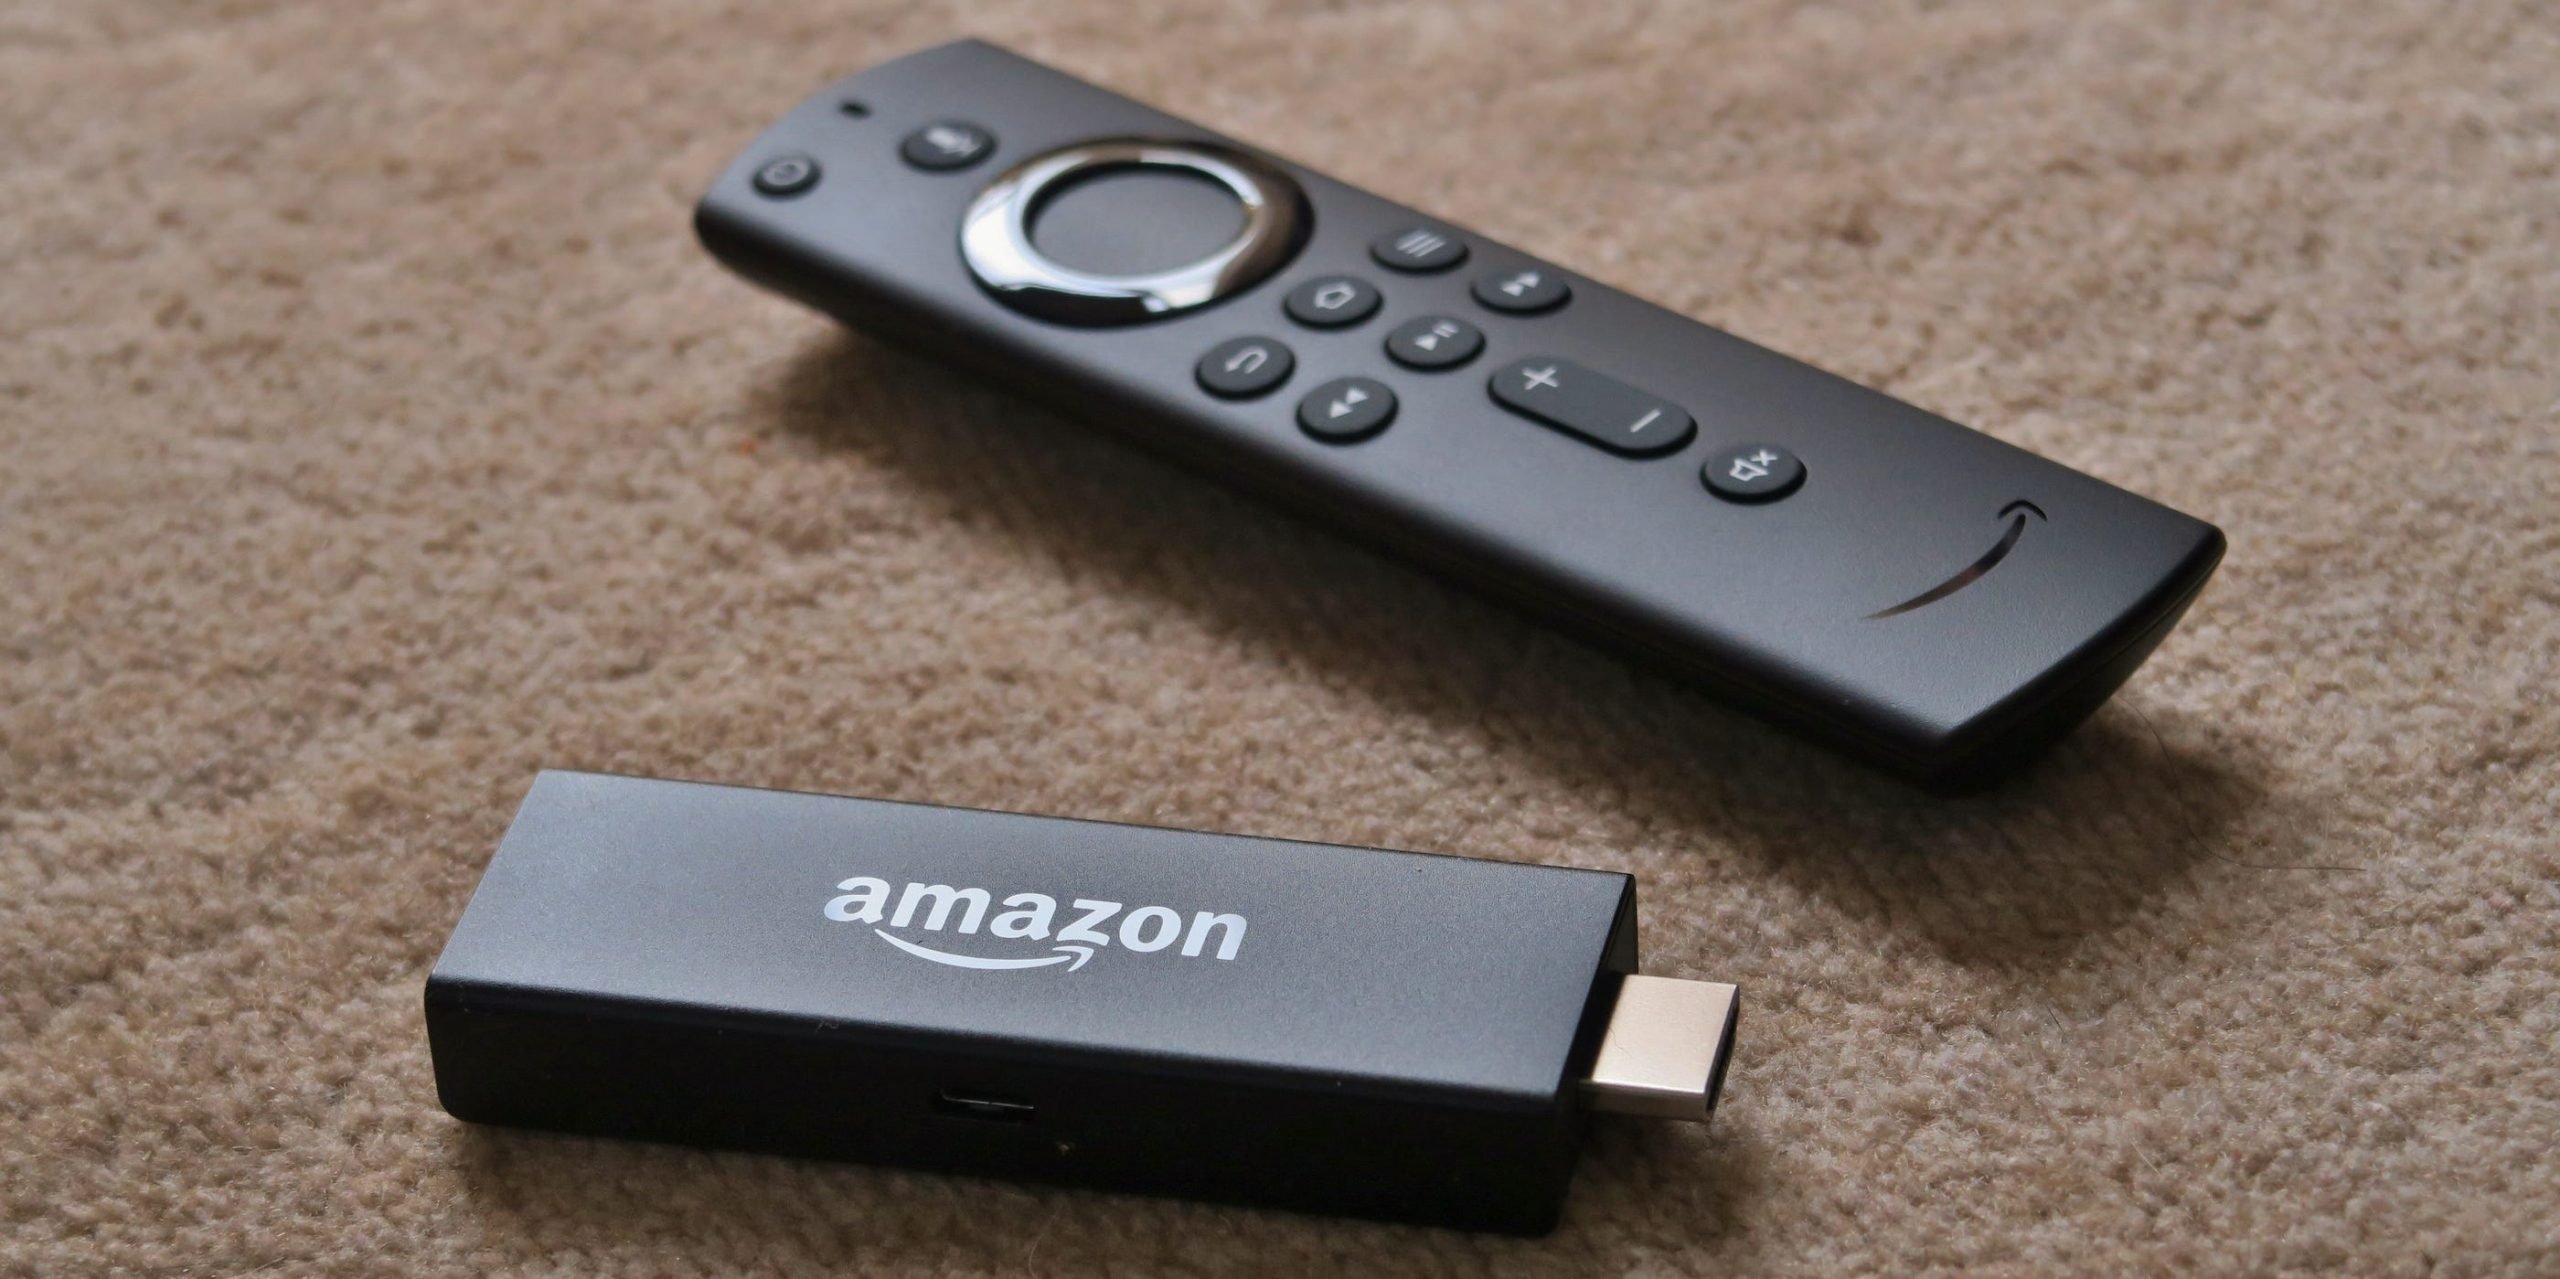 An Amazon Fire TV Stick and remote.